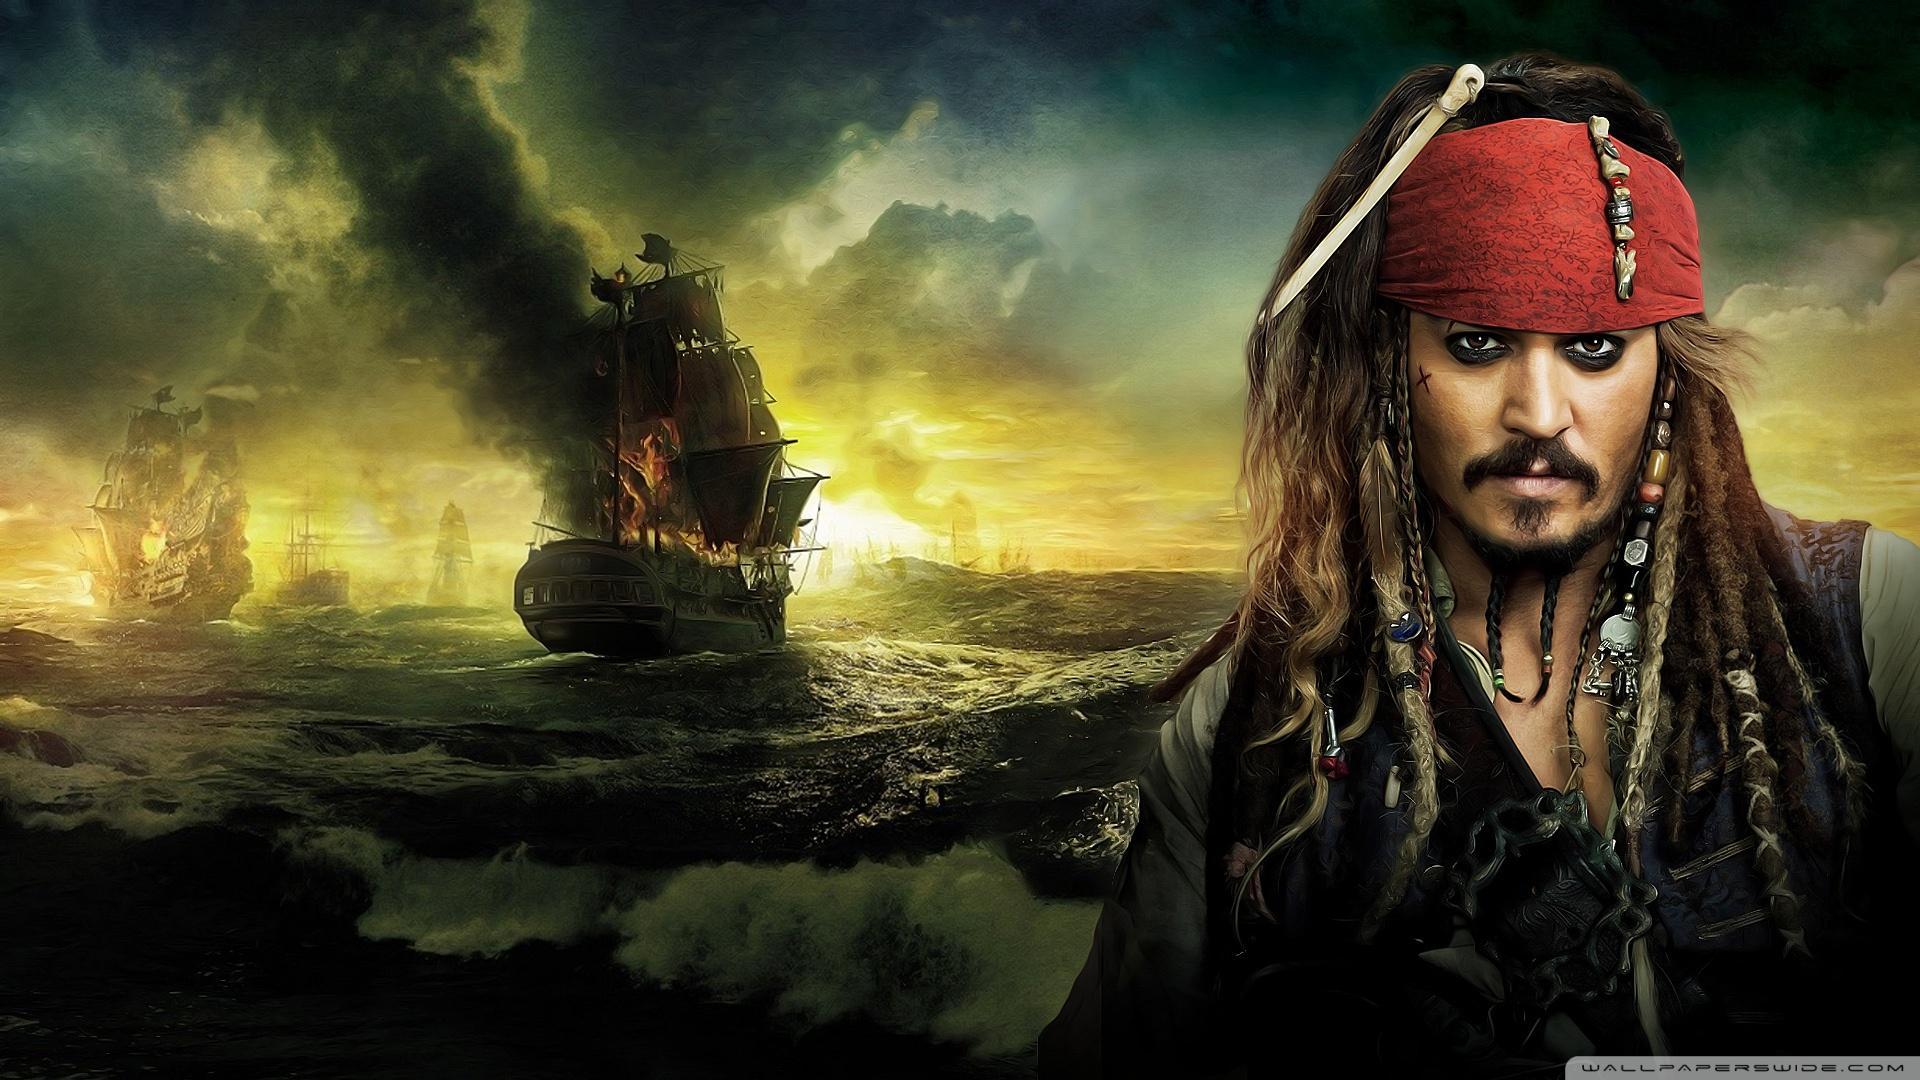 Pirates of the Caribbean Wallpapers - Top Free Pirates of the Caribbean  Backgrounds - WallpaperAccess